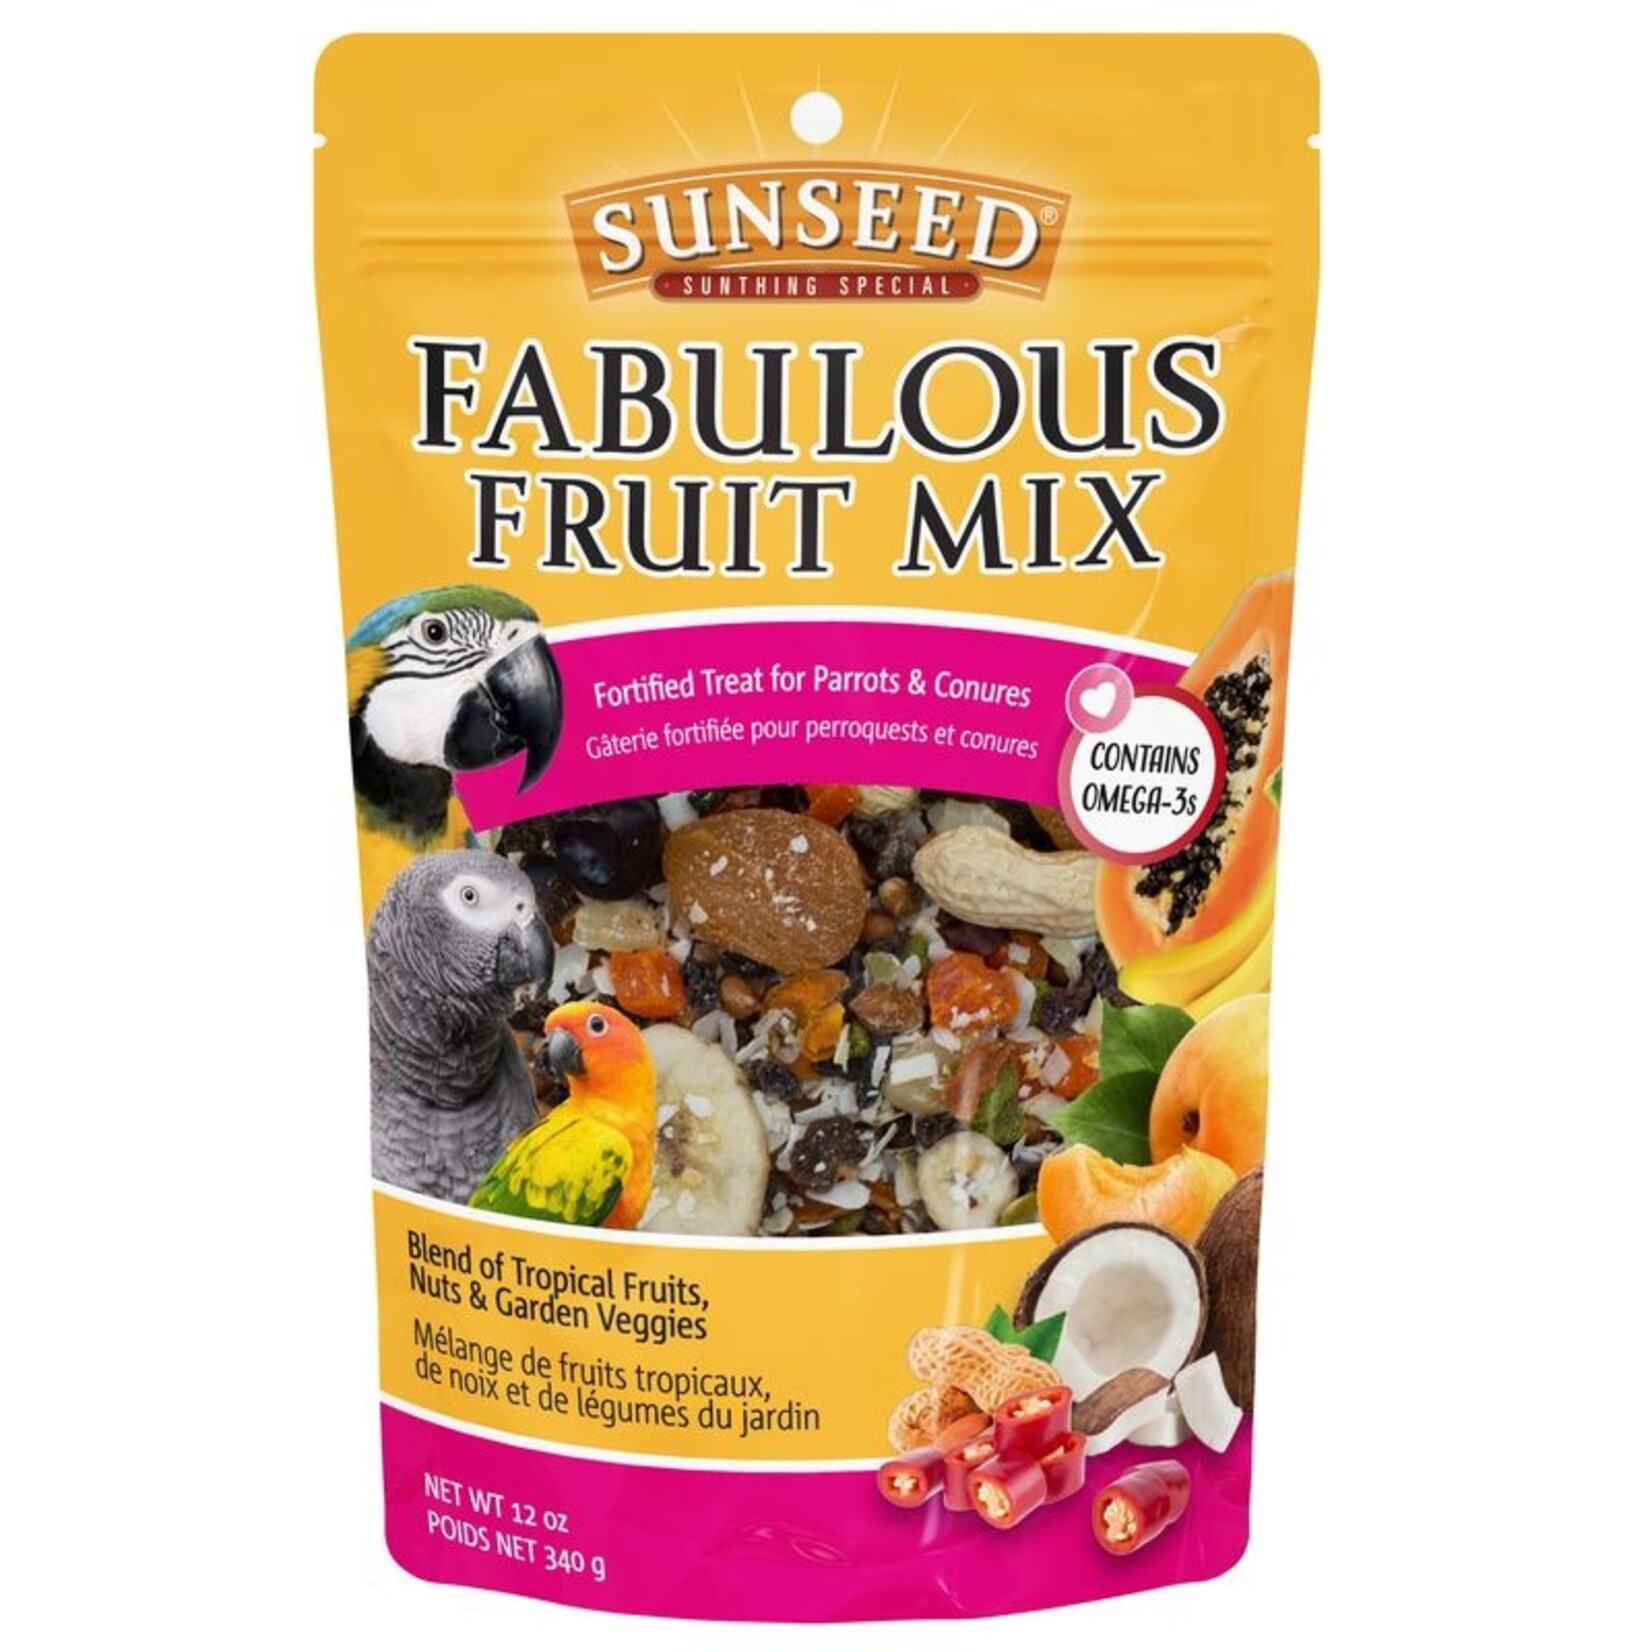 Sunseed Fabulous Fruit Mix Treat for Parrots and Conures, 12oz